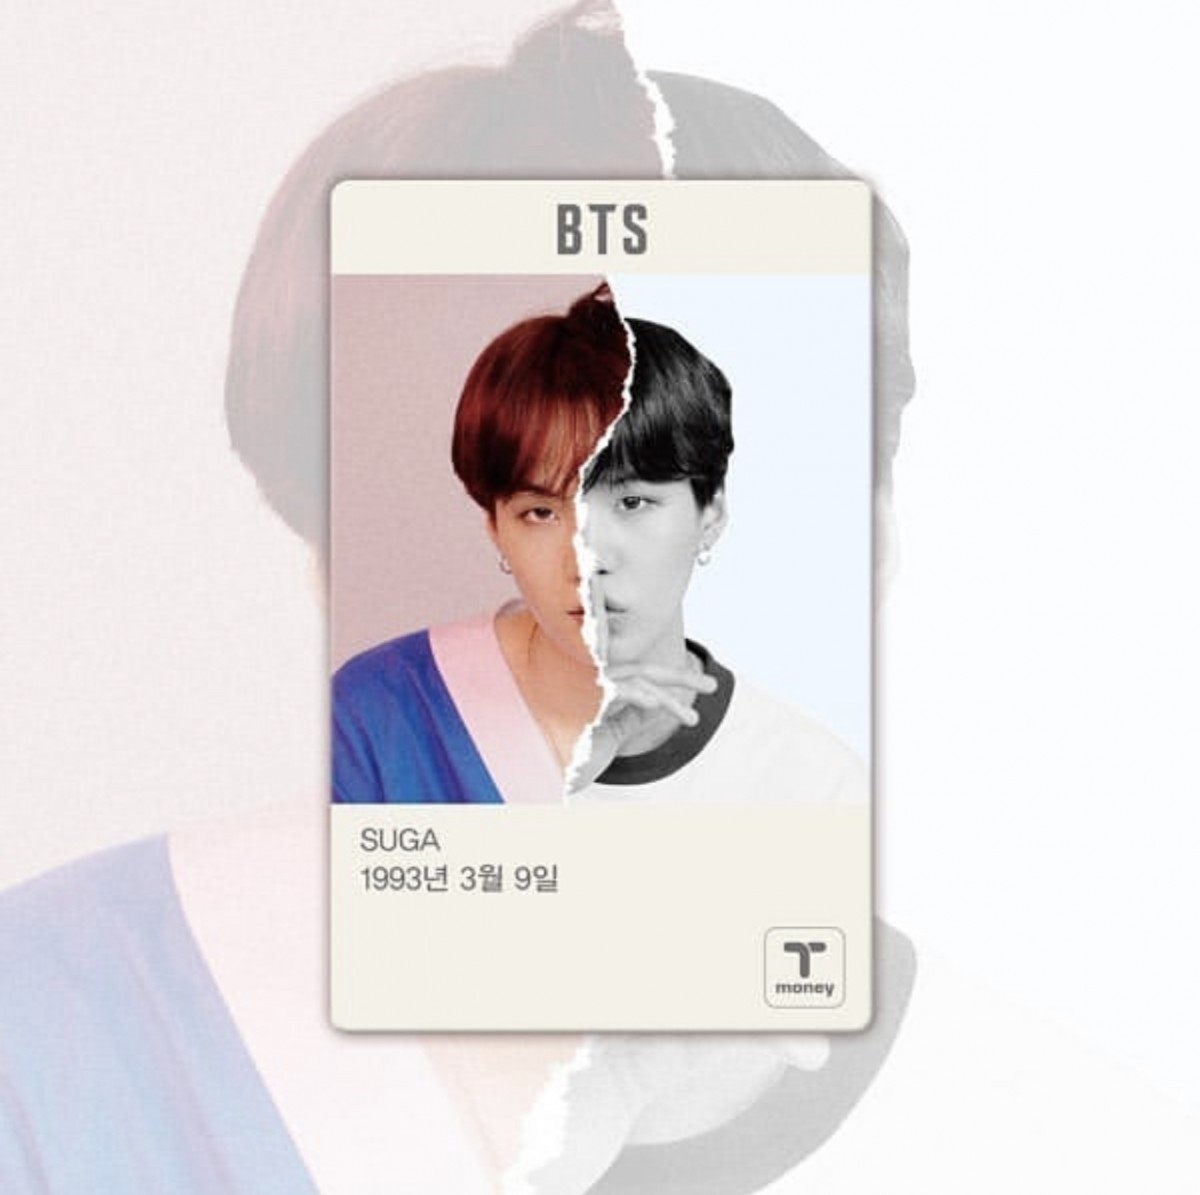 * sale *[ same day shipping ][ BTS bulletproof boy . transparent T-money Card 2019 ver. ] LOVE YOUR SELF. van tongue Korea traffic card official commodity 